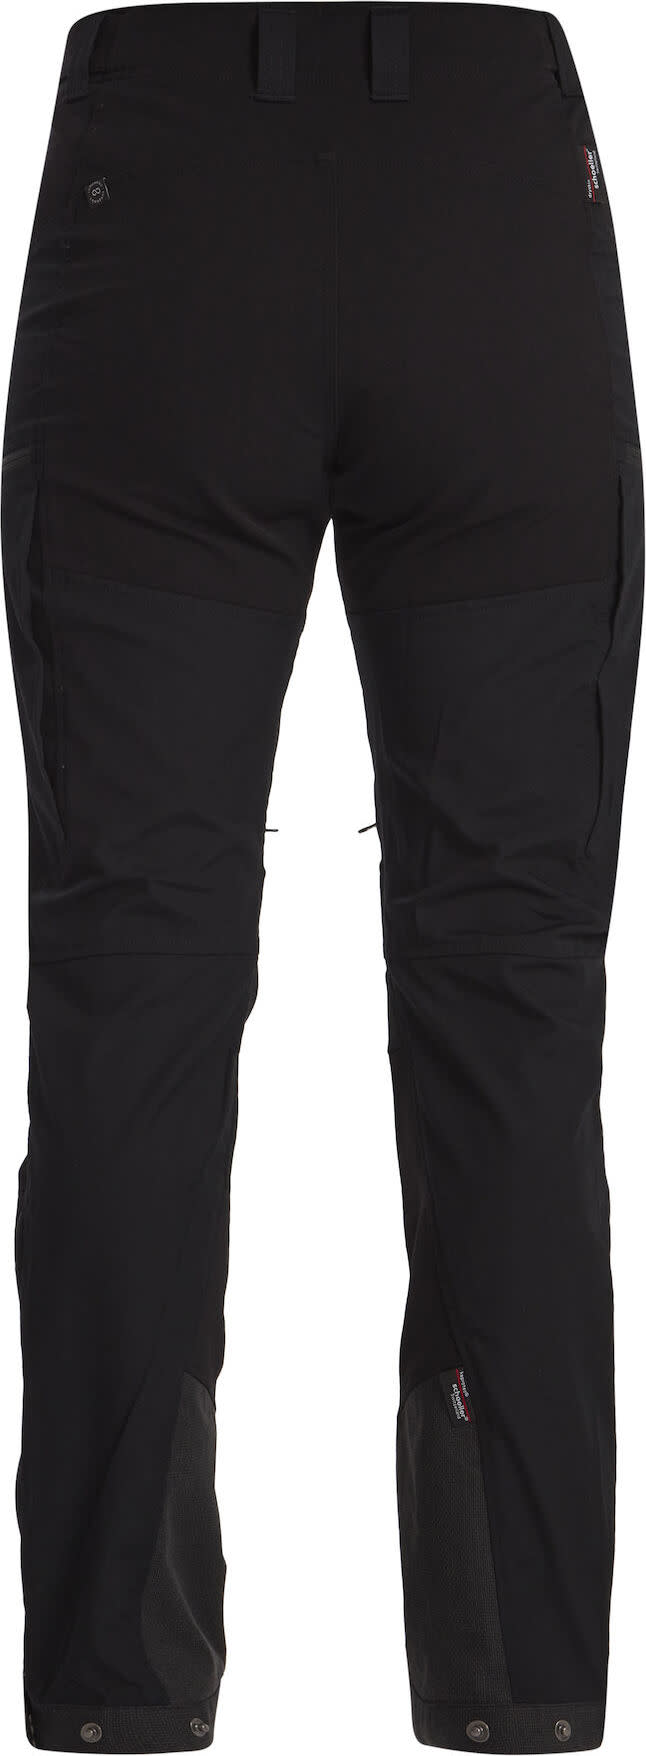 Lundhags Women's Makke High Waist Curved Pant Black Lundhags